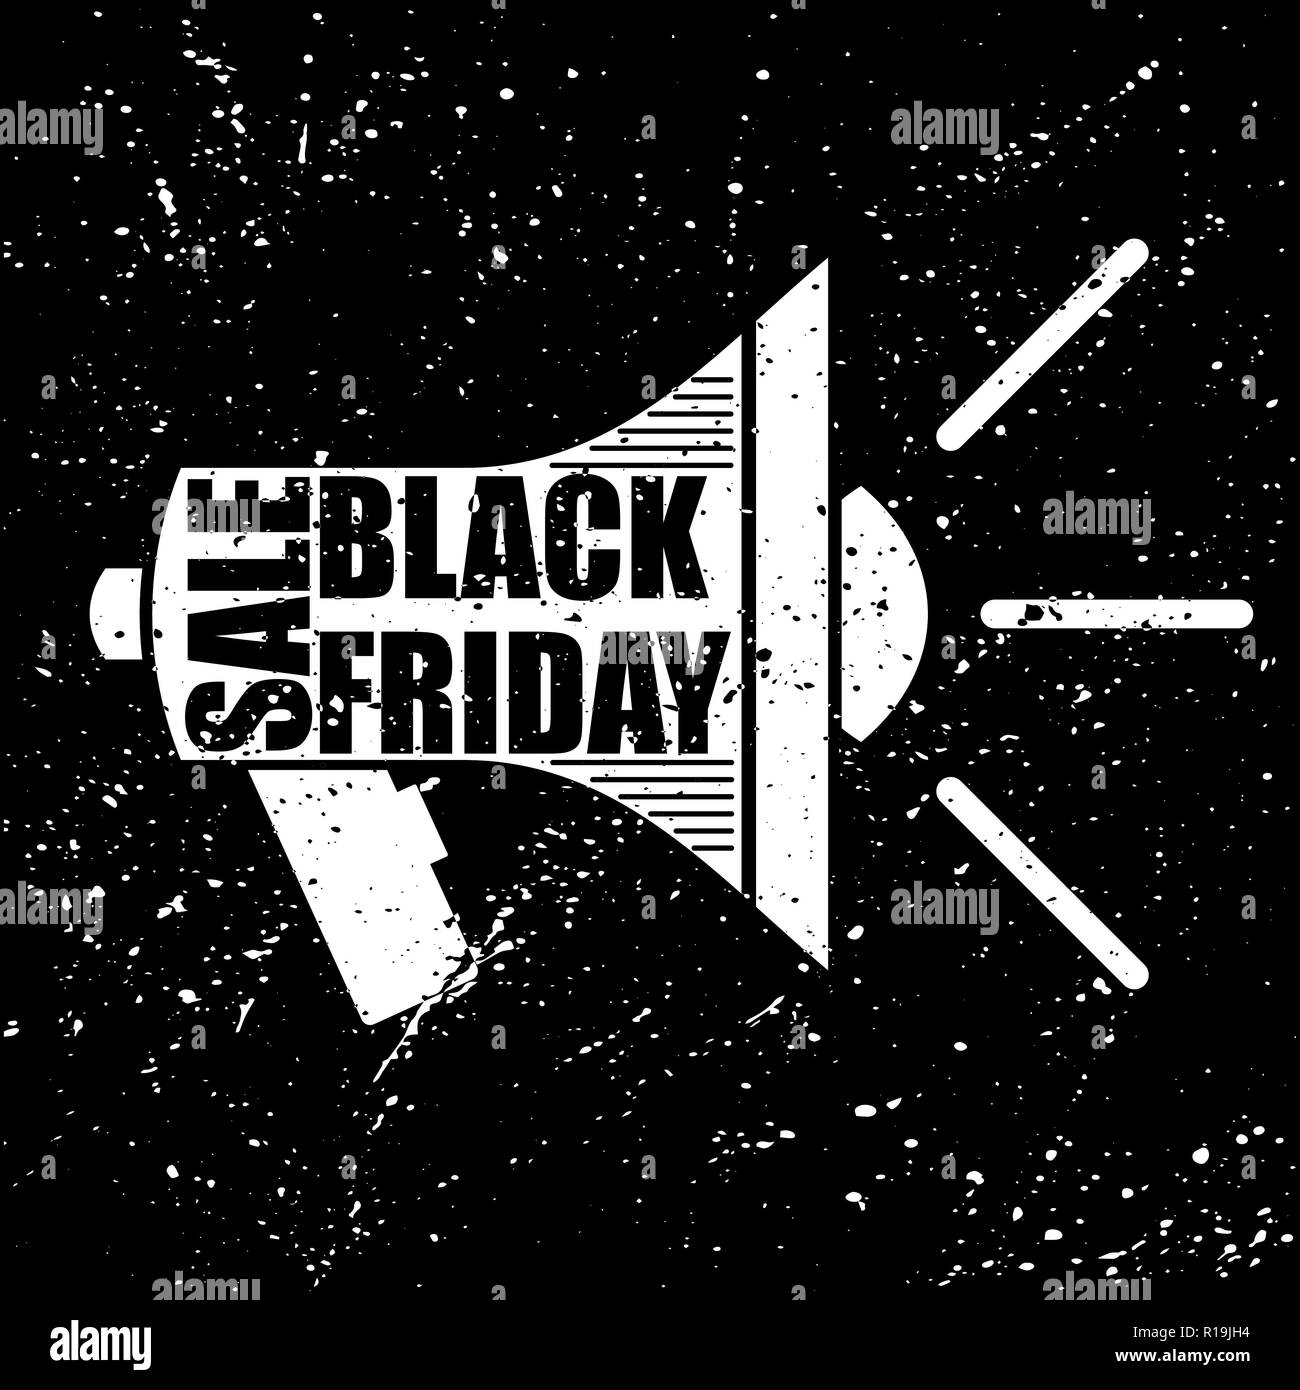 White grunge speaker with black friday promo text Stock Vector